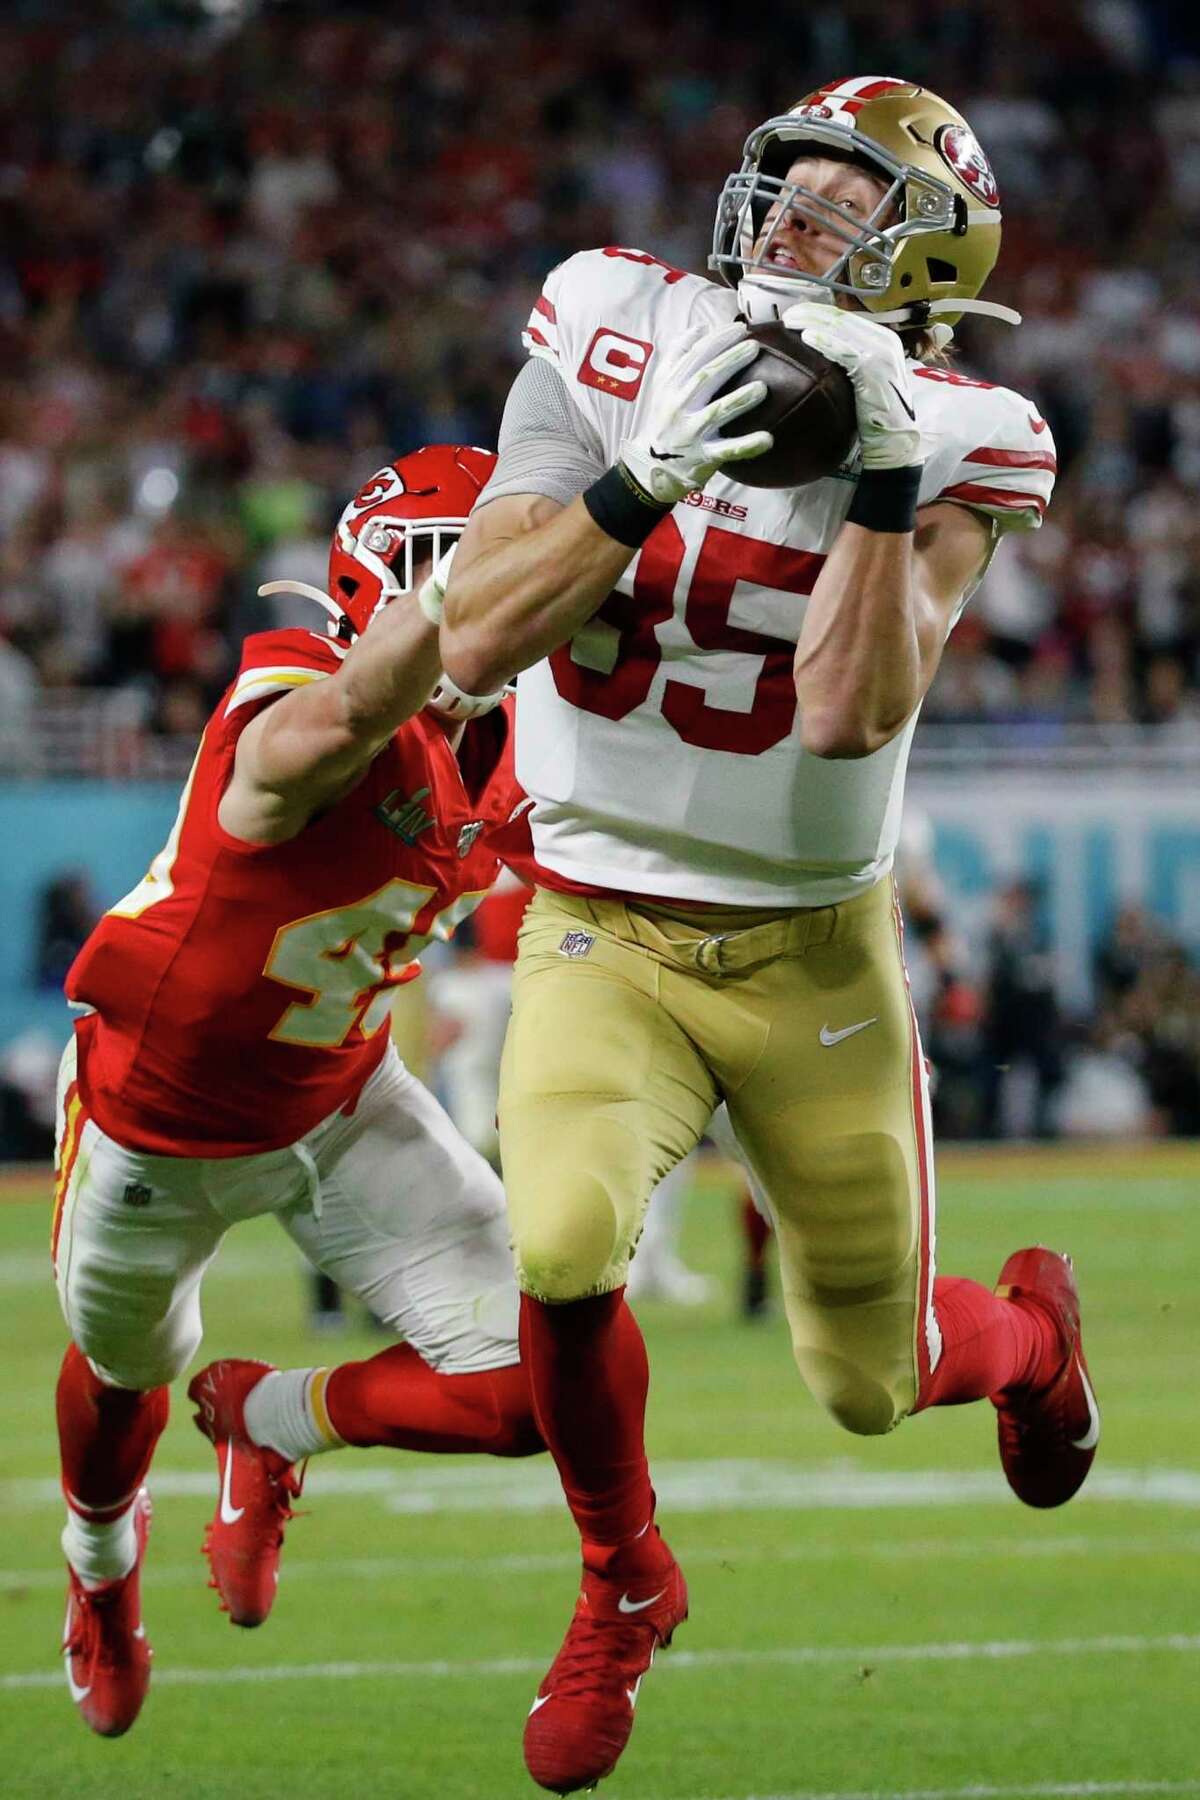 San Francisco 49ers' George Kittle (85) catches a pass in front of Kansas City Chiefs' Daniel Sorensen during the first half of the NFL Super Bowl 54 football game Sunday, Feb. 2, 2020, in Miami Gardens, Fla. The play was called back on a penalty by Kittle.